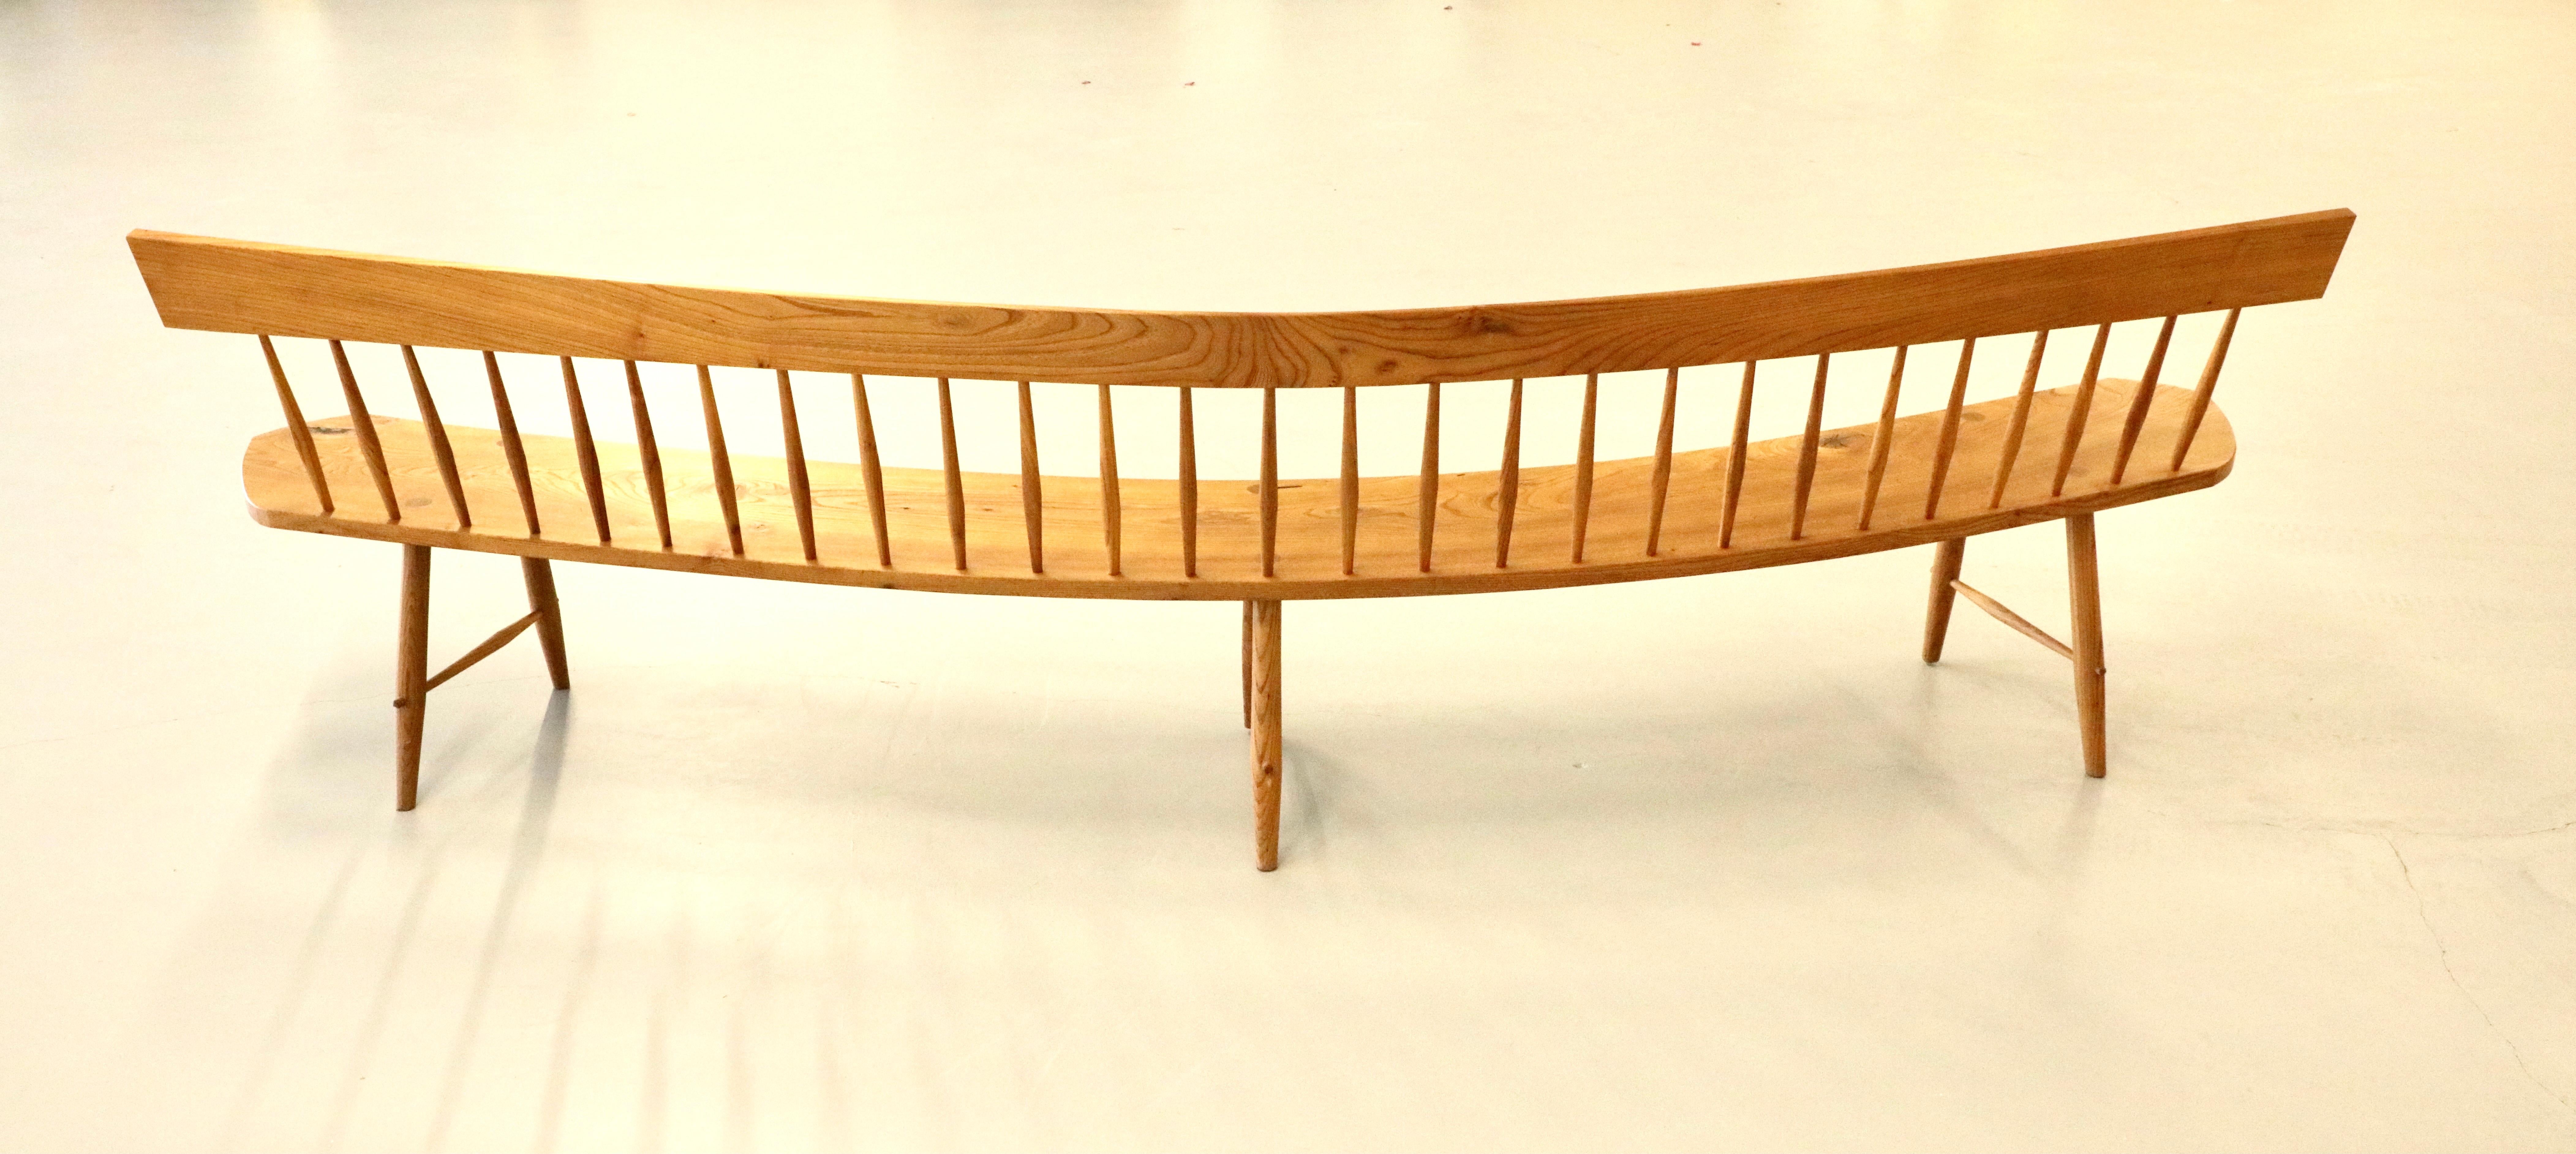 Hand-Crafted American Craft Bench